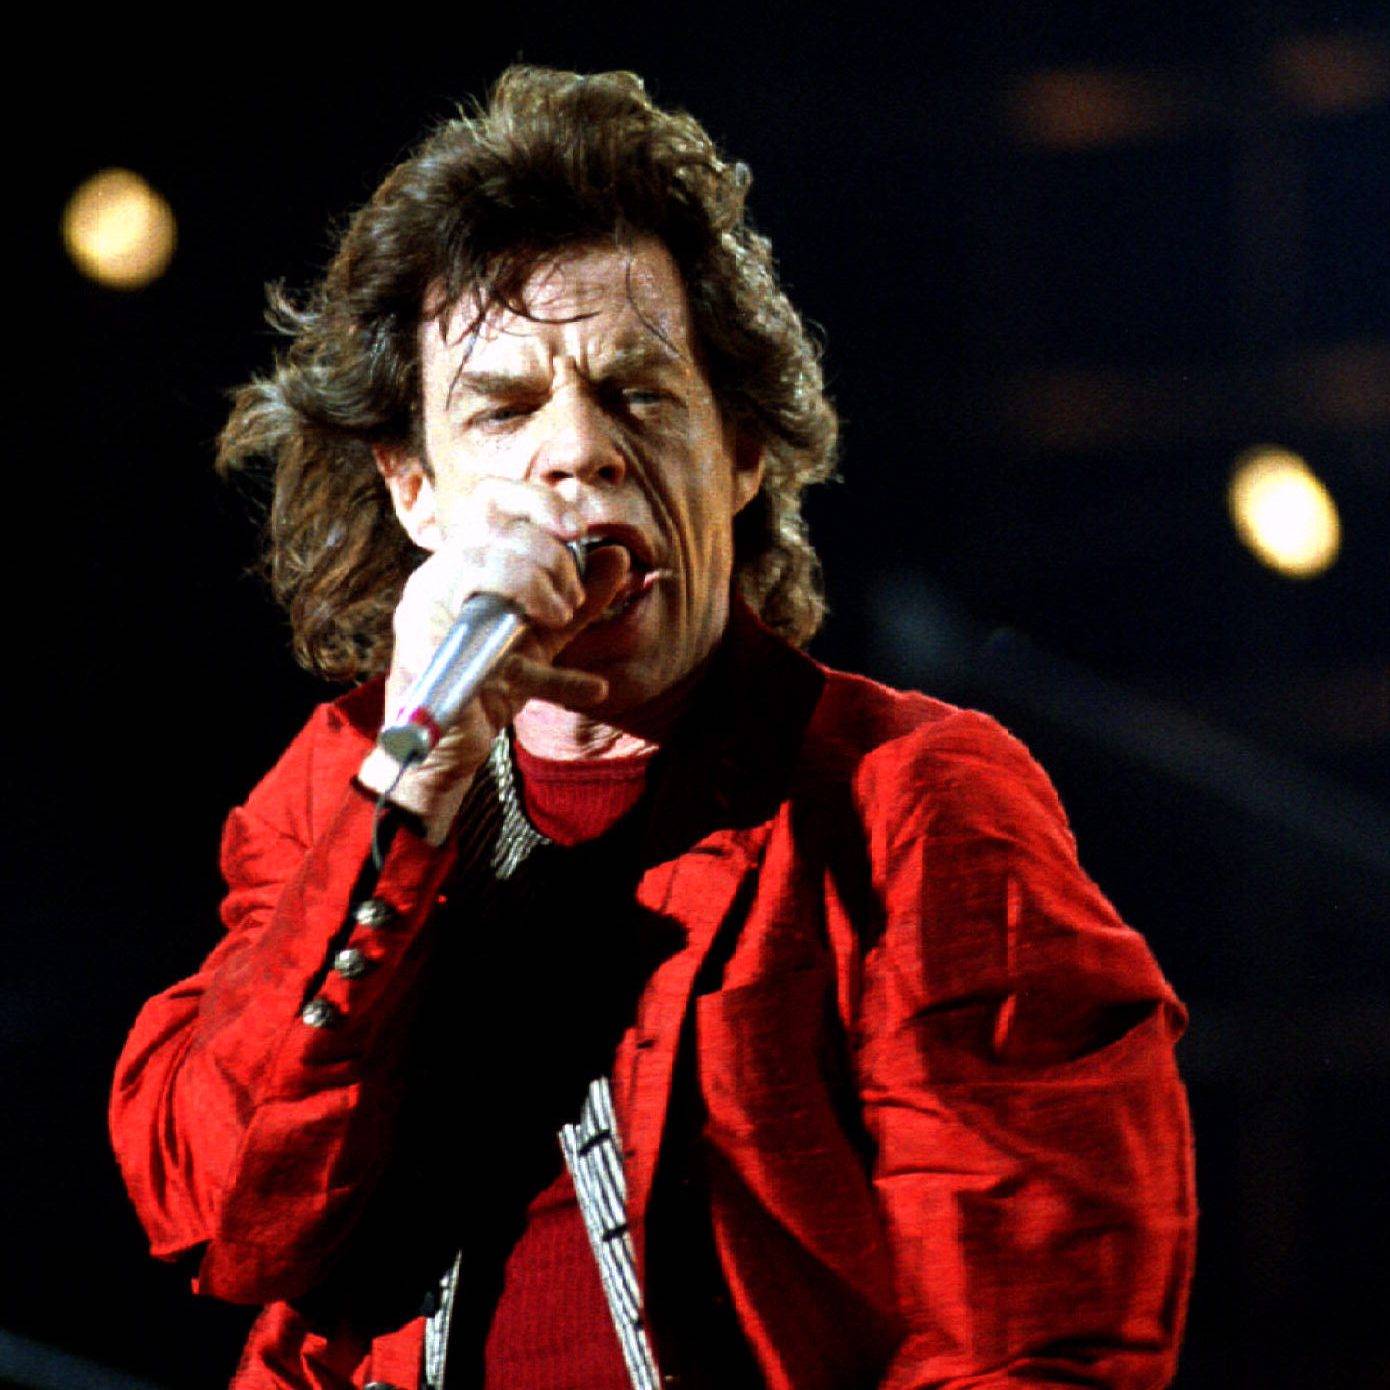 Pop singer Mick Jagger performs the night of February 9 before a 60,000 strong audience at River Pla..